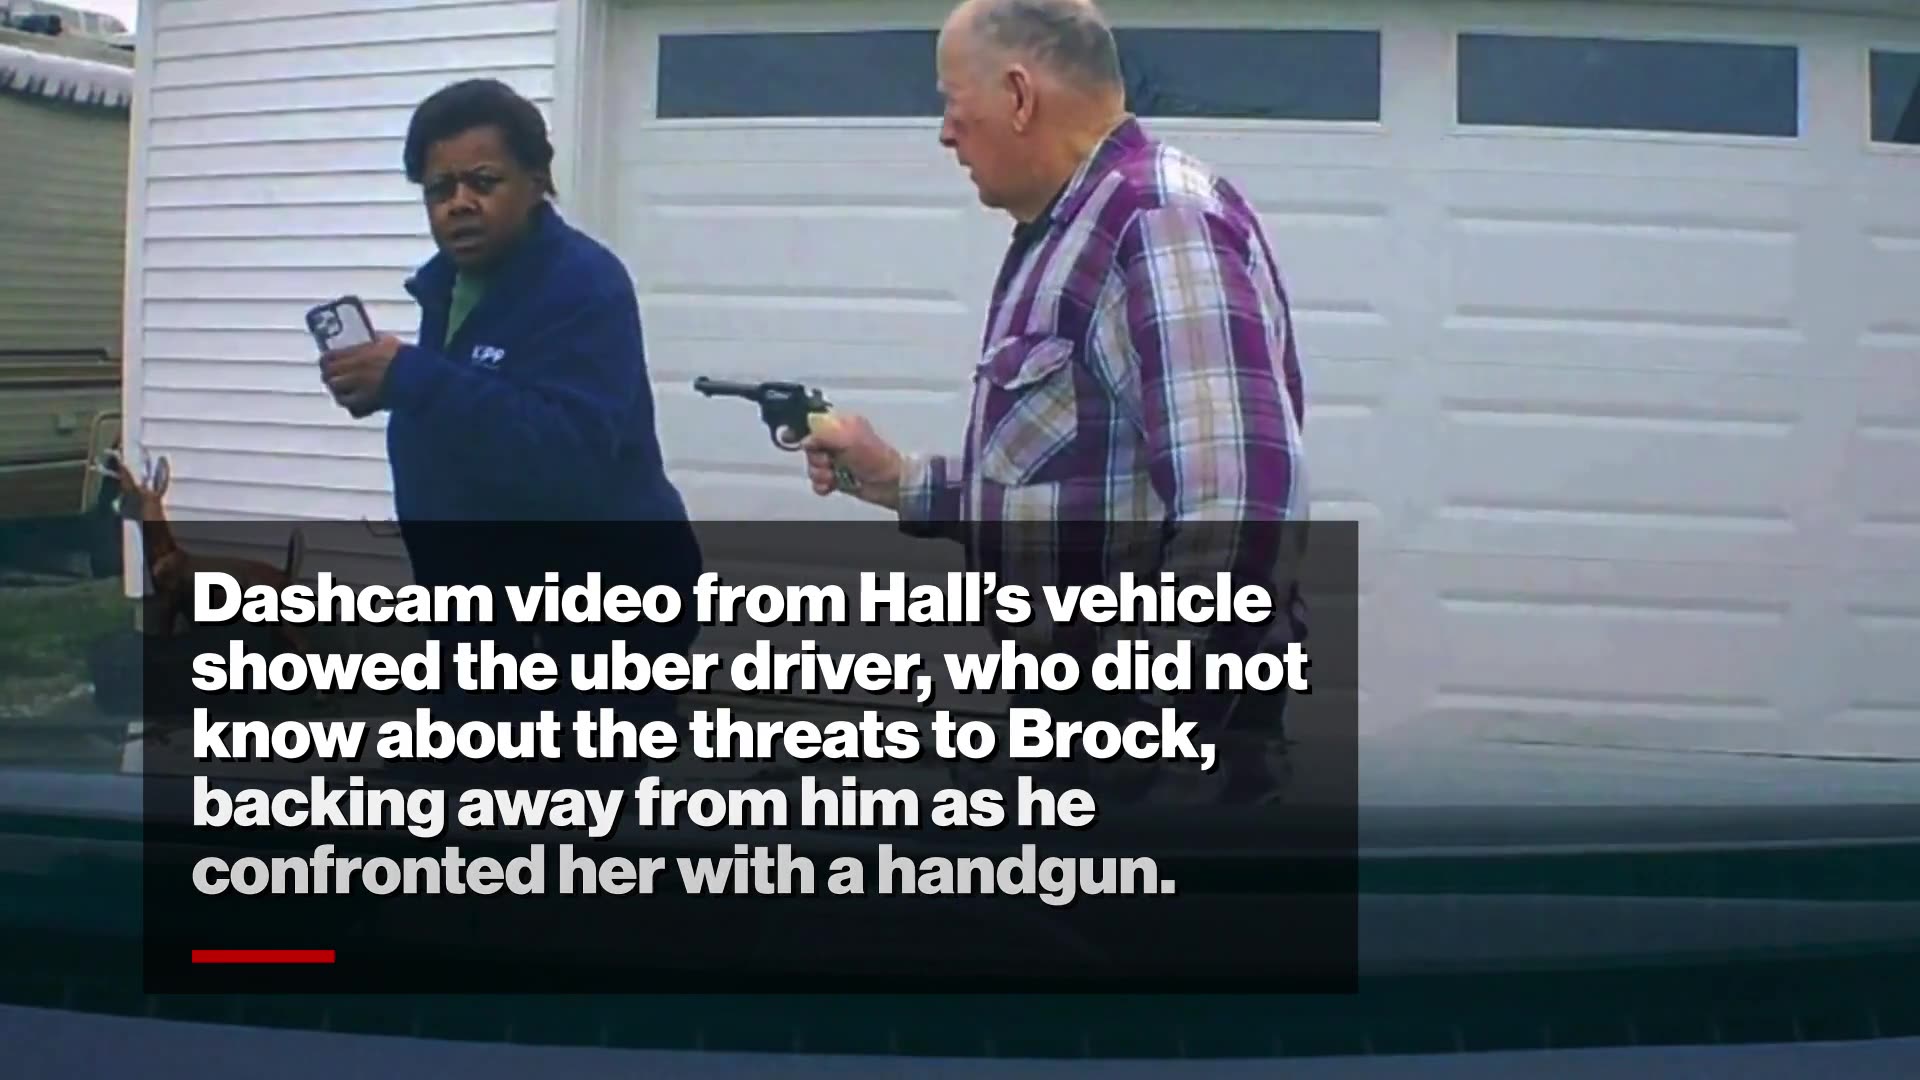 'I'm sure glad you guys are here': Moment scam victim greets cops after allegedly shooting innocent Uber driver